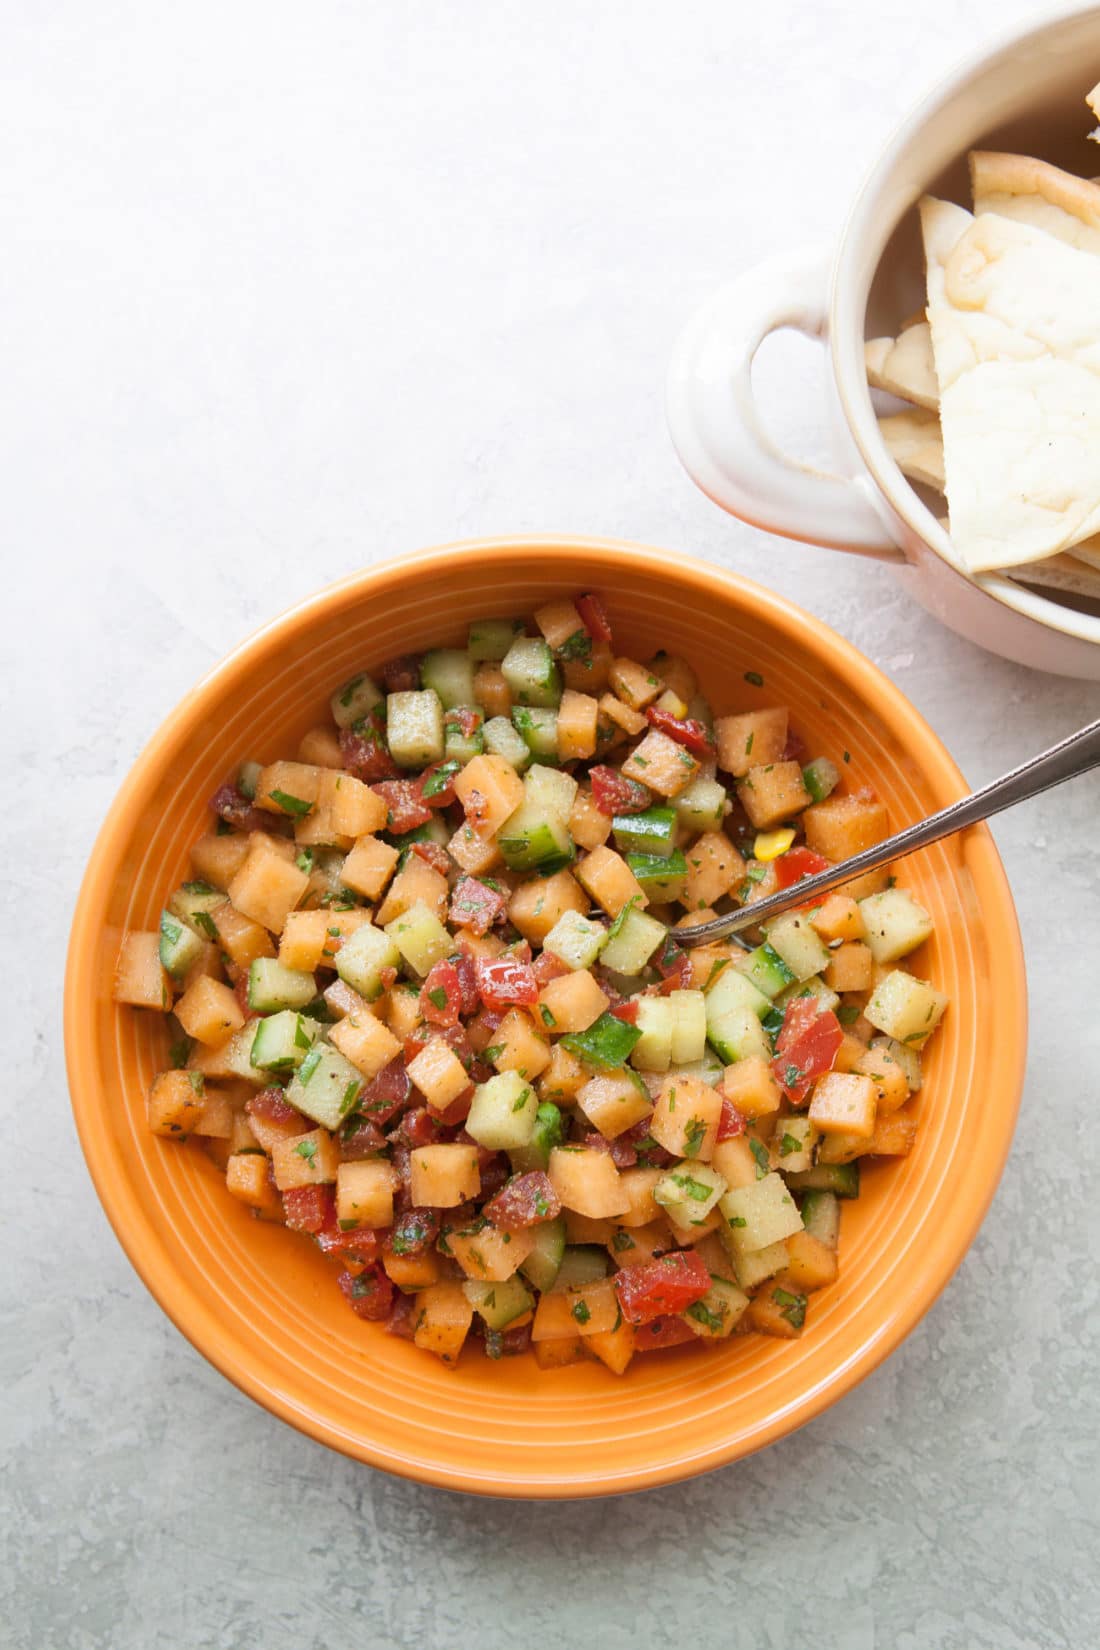 Spoon in a bowl of Corn, Cucumber and Cantaloupe Salsa.